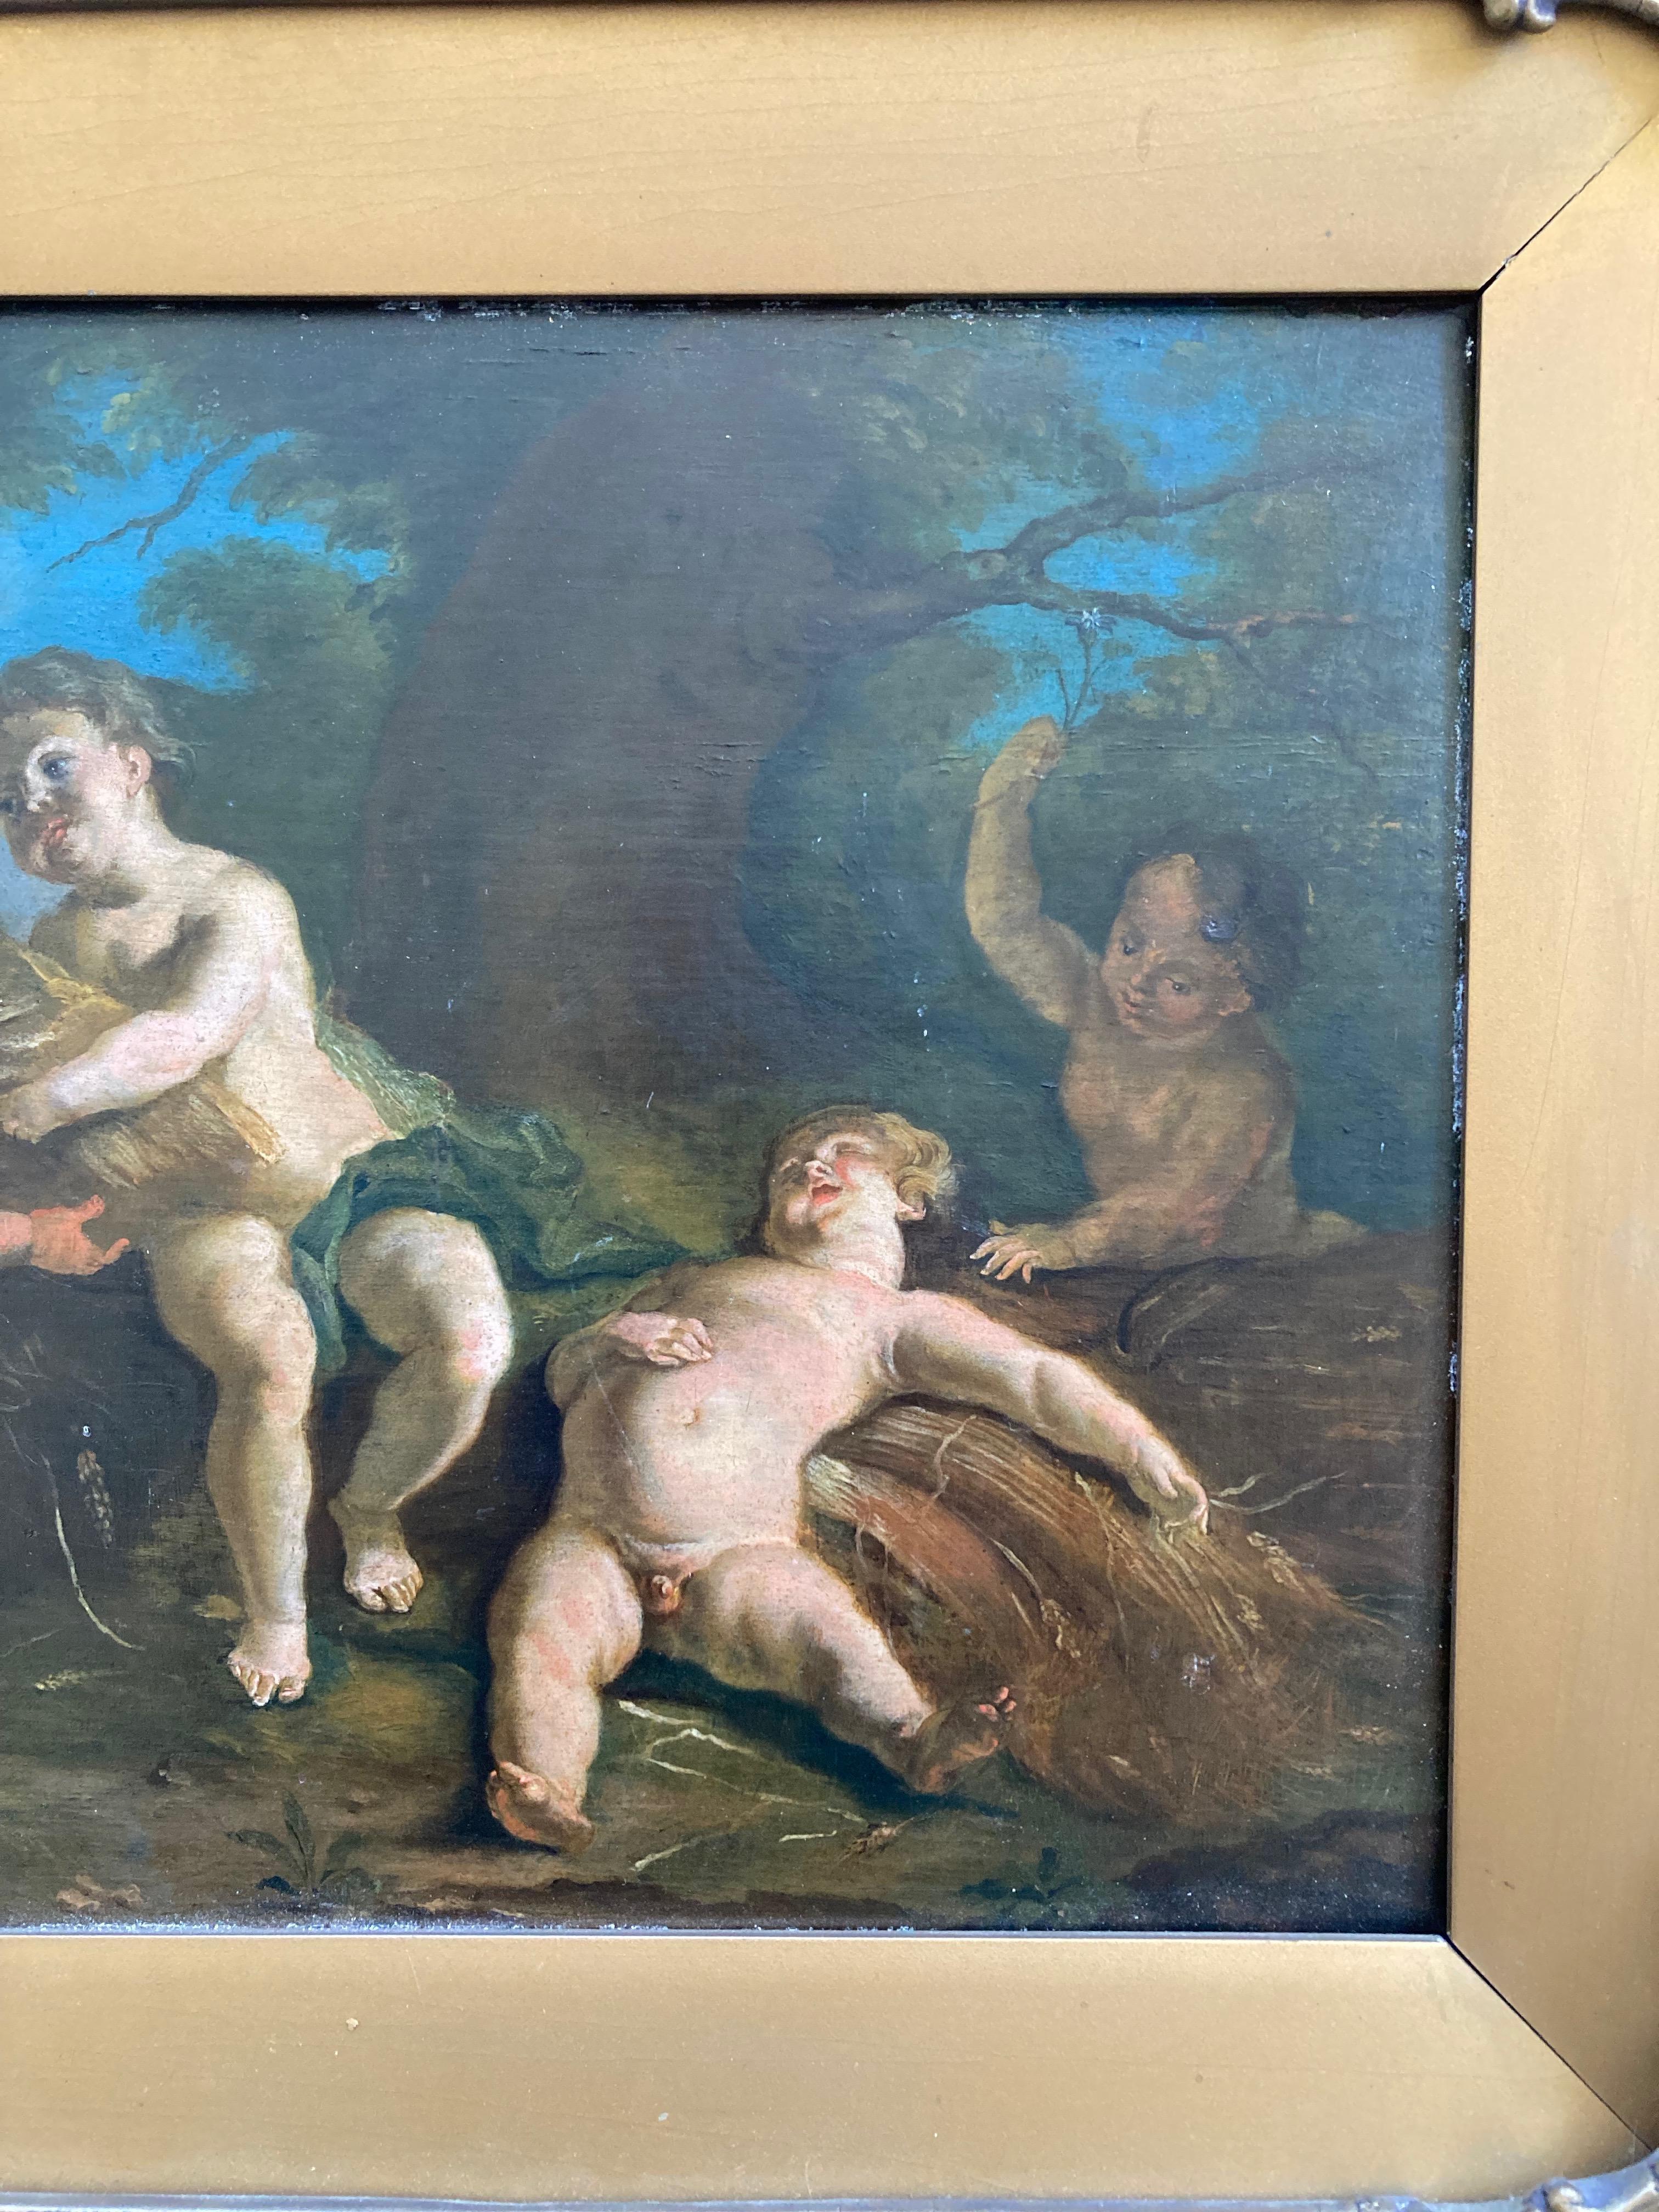 Old master painting of Cherubs cavorting in a woodland setting - Gray Landscape Painting by Jean-Honoré Fragonard